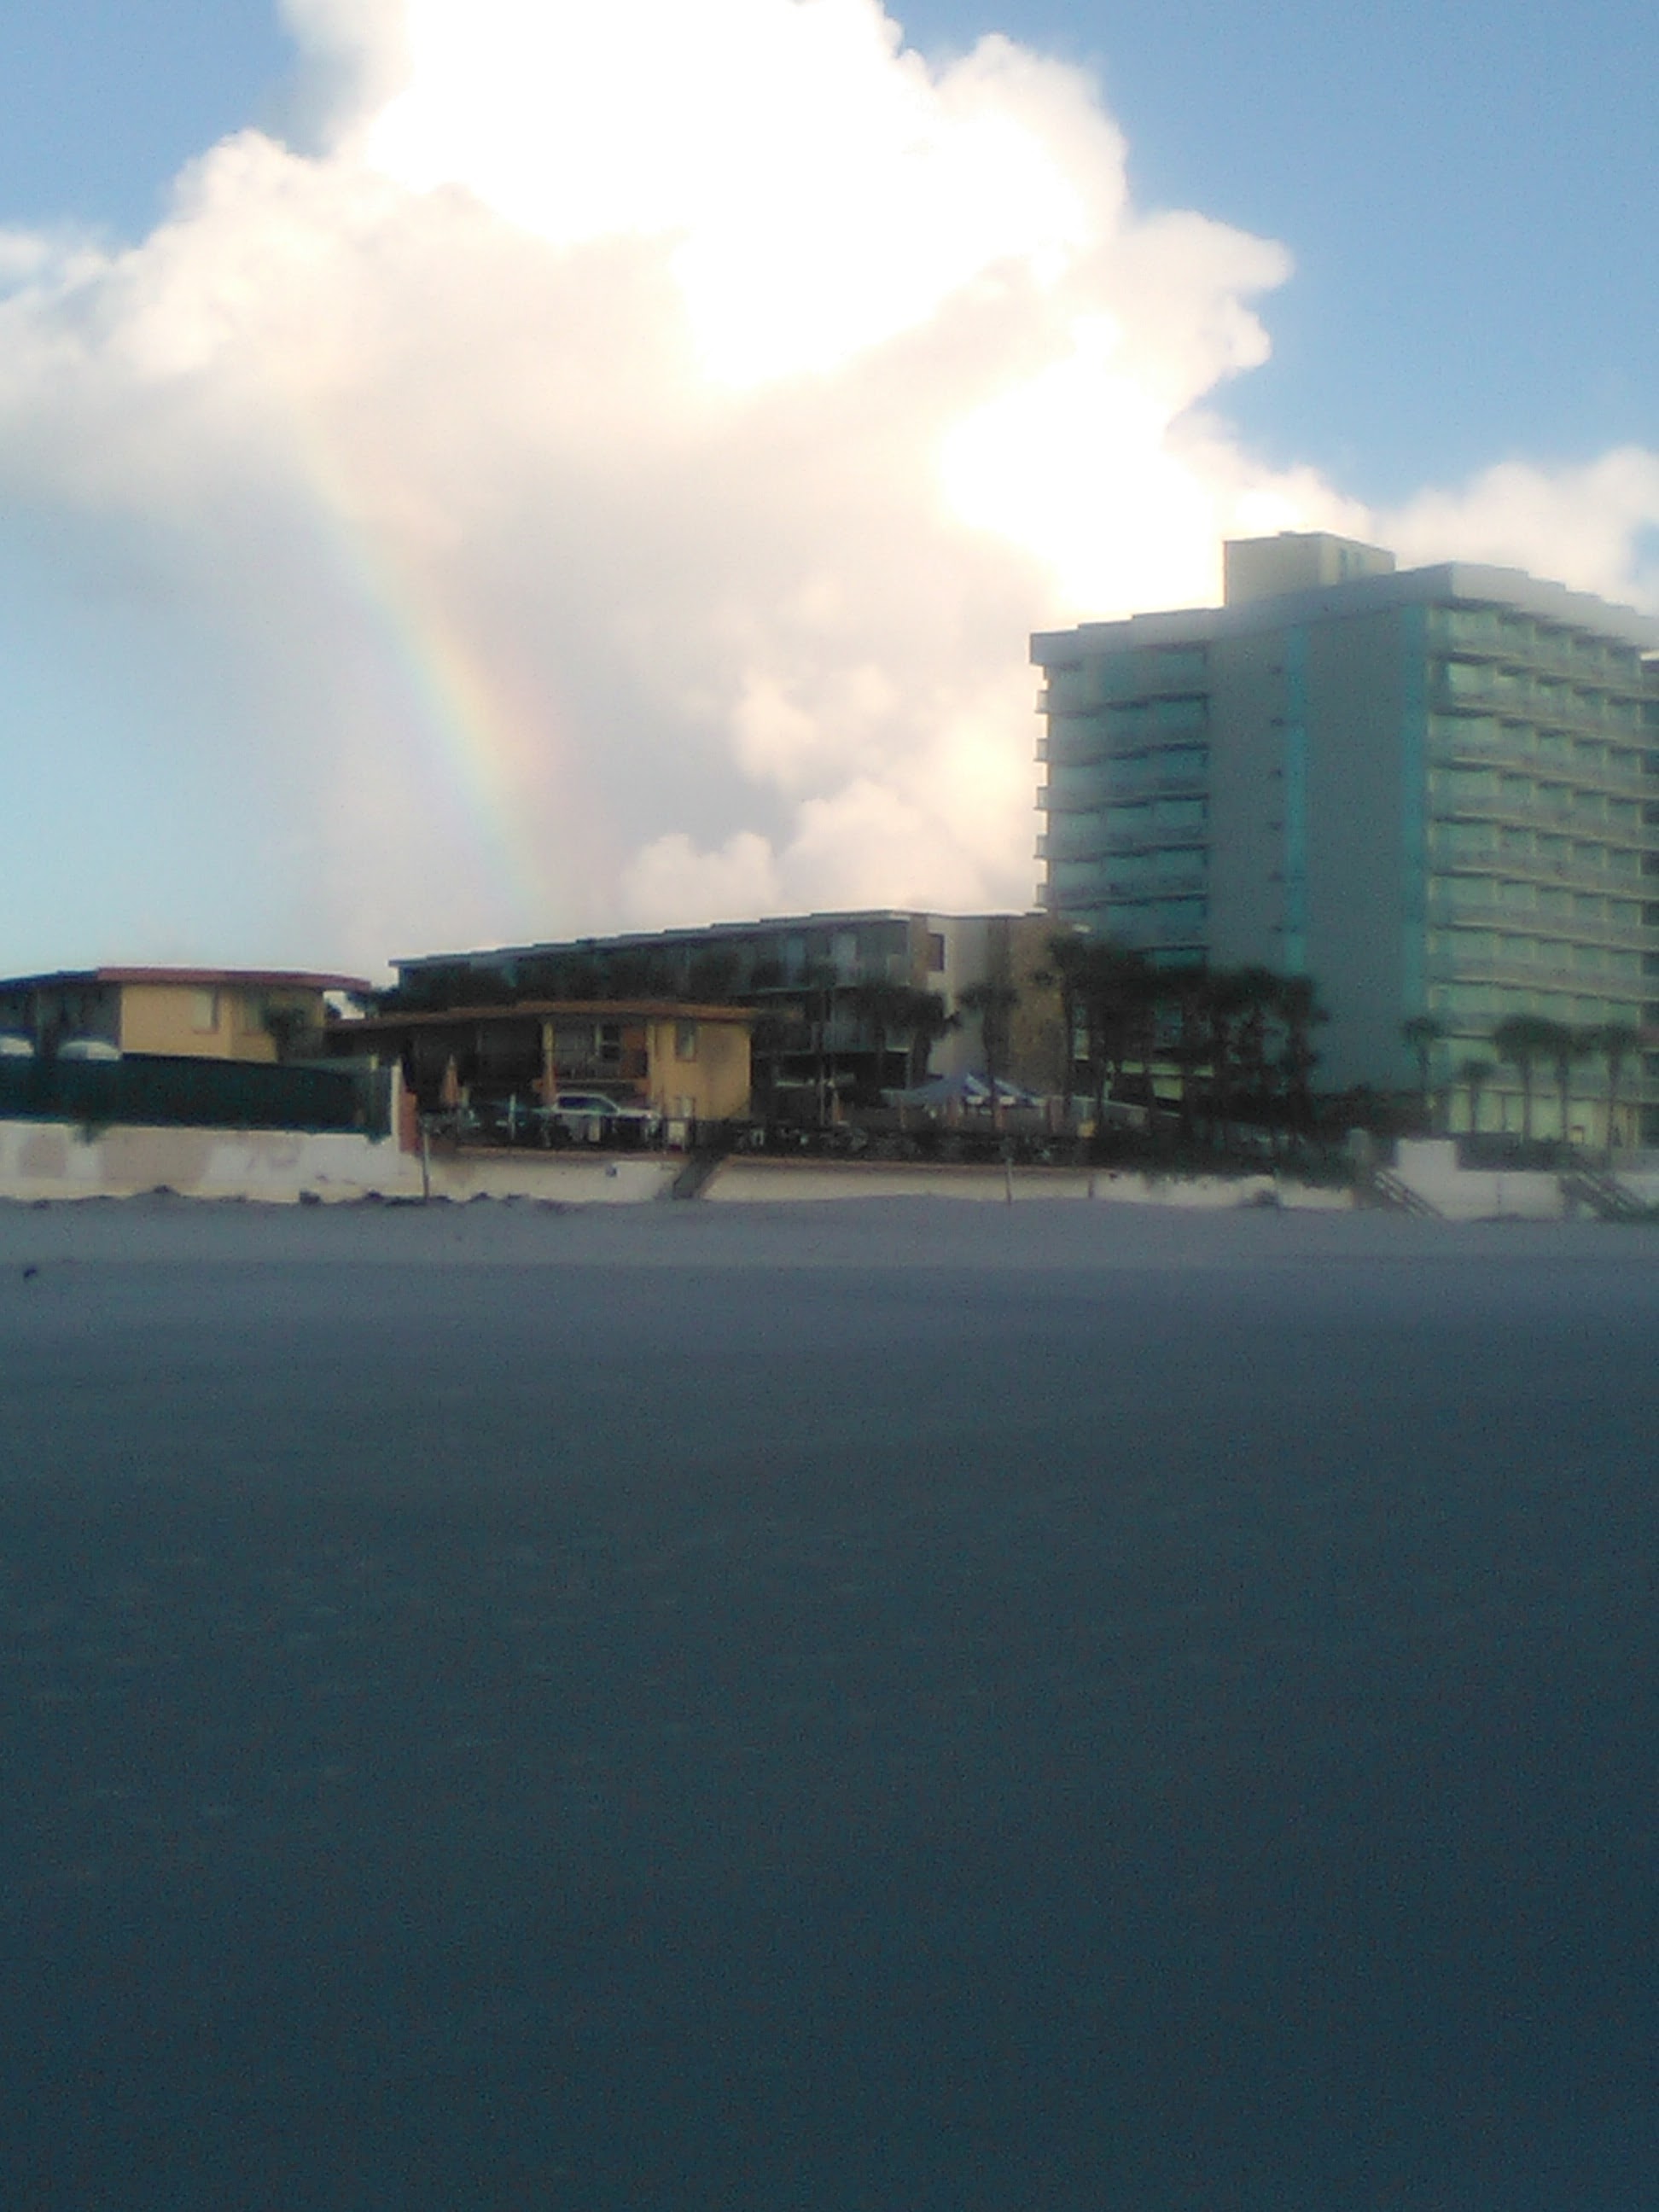 Rainbow coming from a cloud over buildings on a beach.